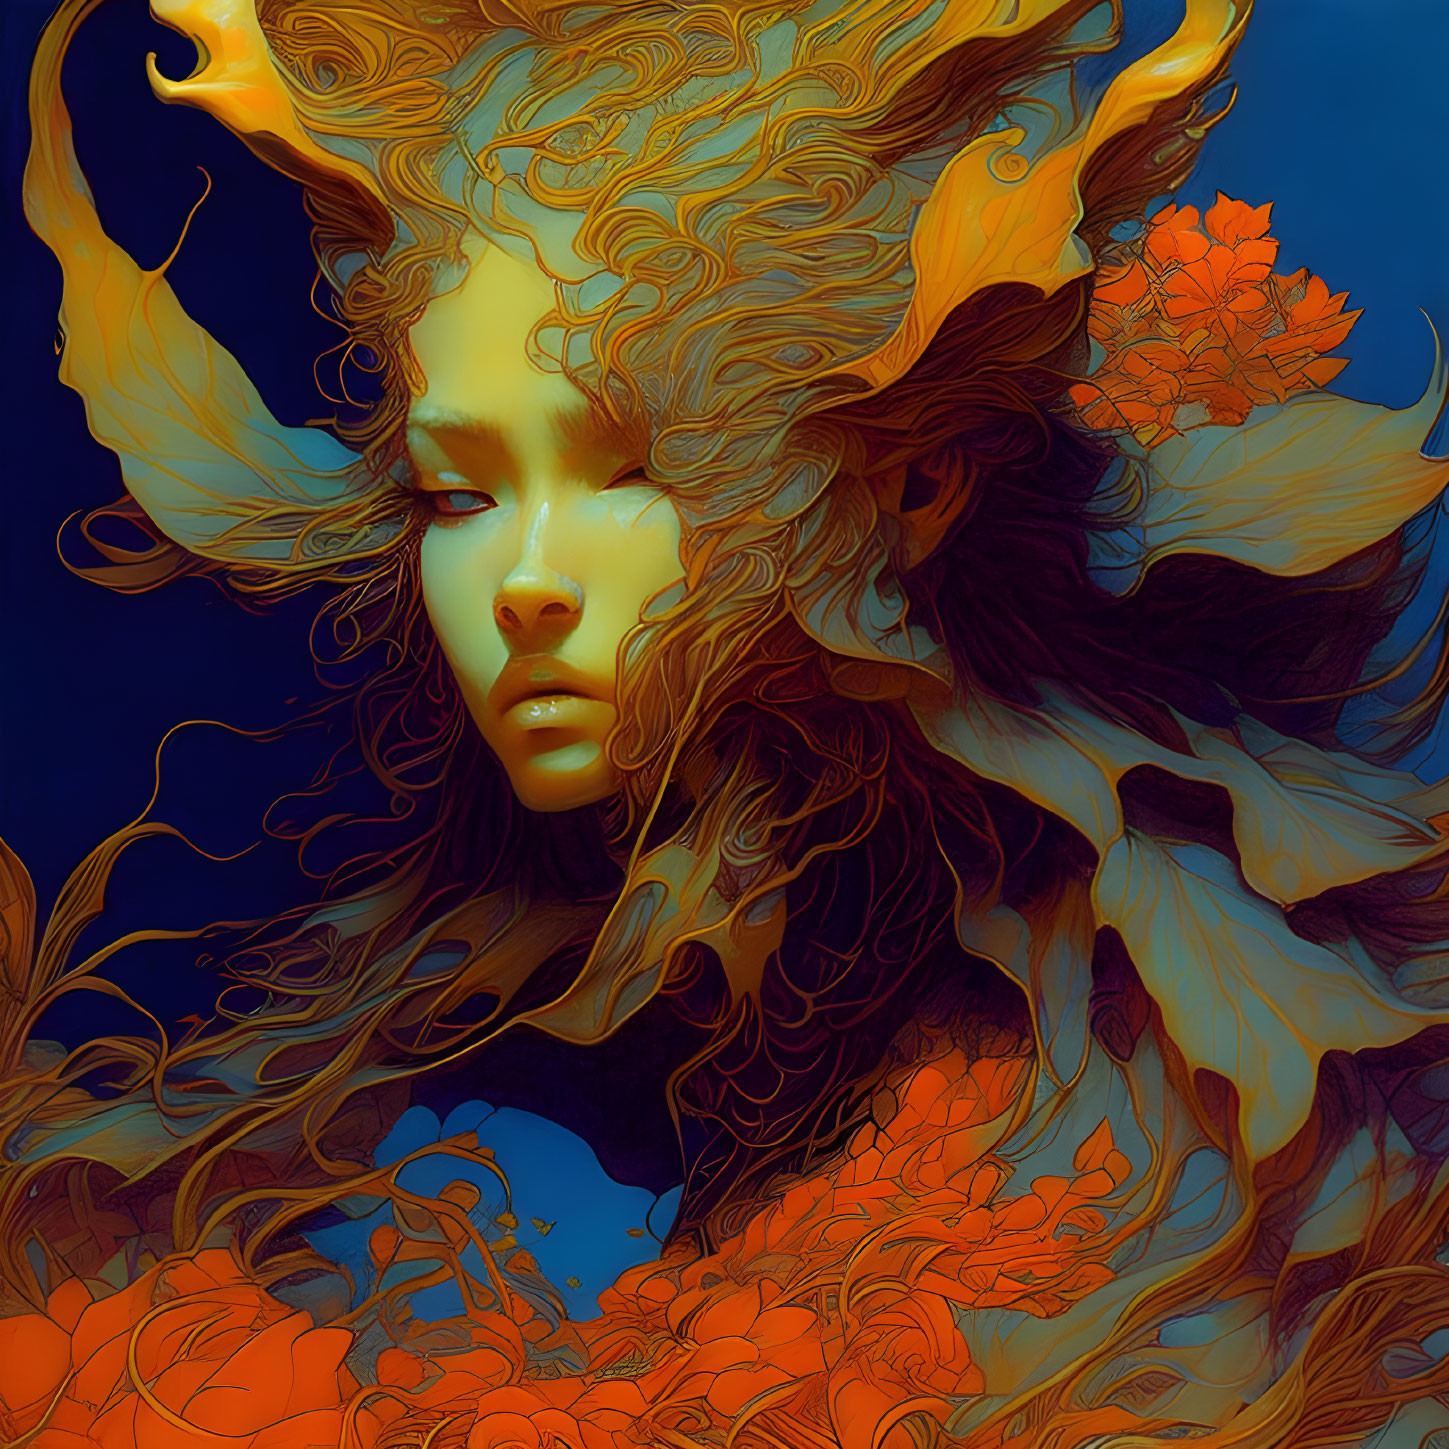 Fantasy illustration: Woman with golden hair and orange flowers on blue background